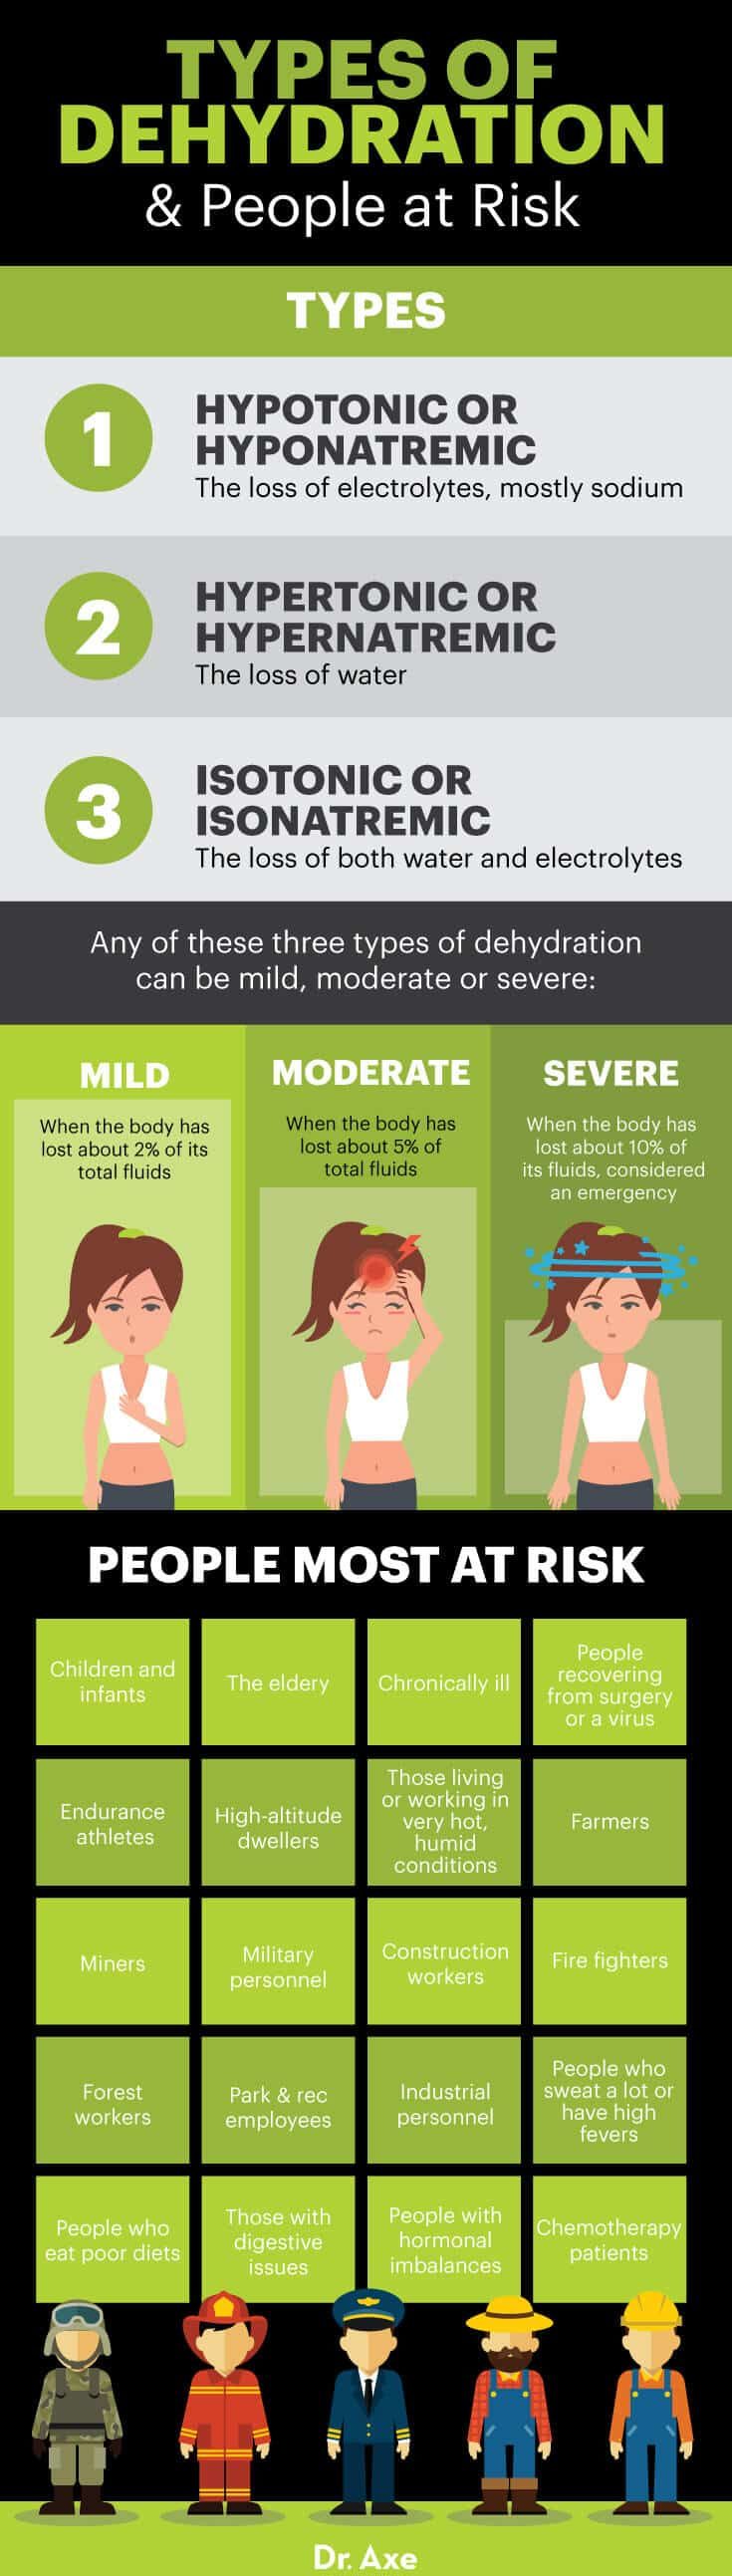 Types of dehydration - Dr. Axe